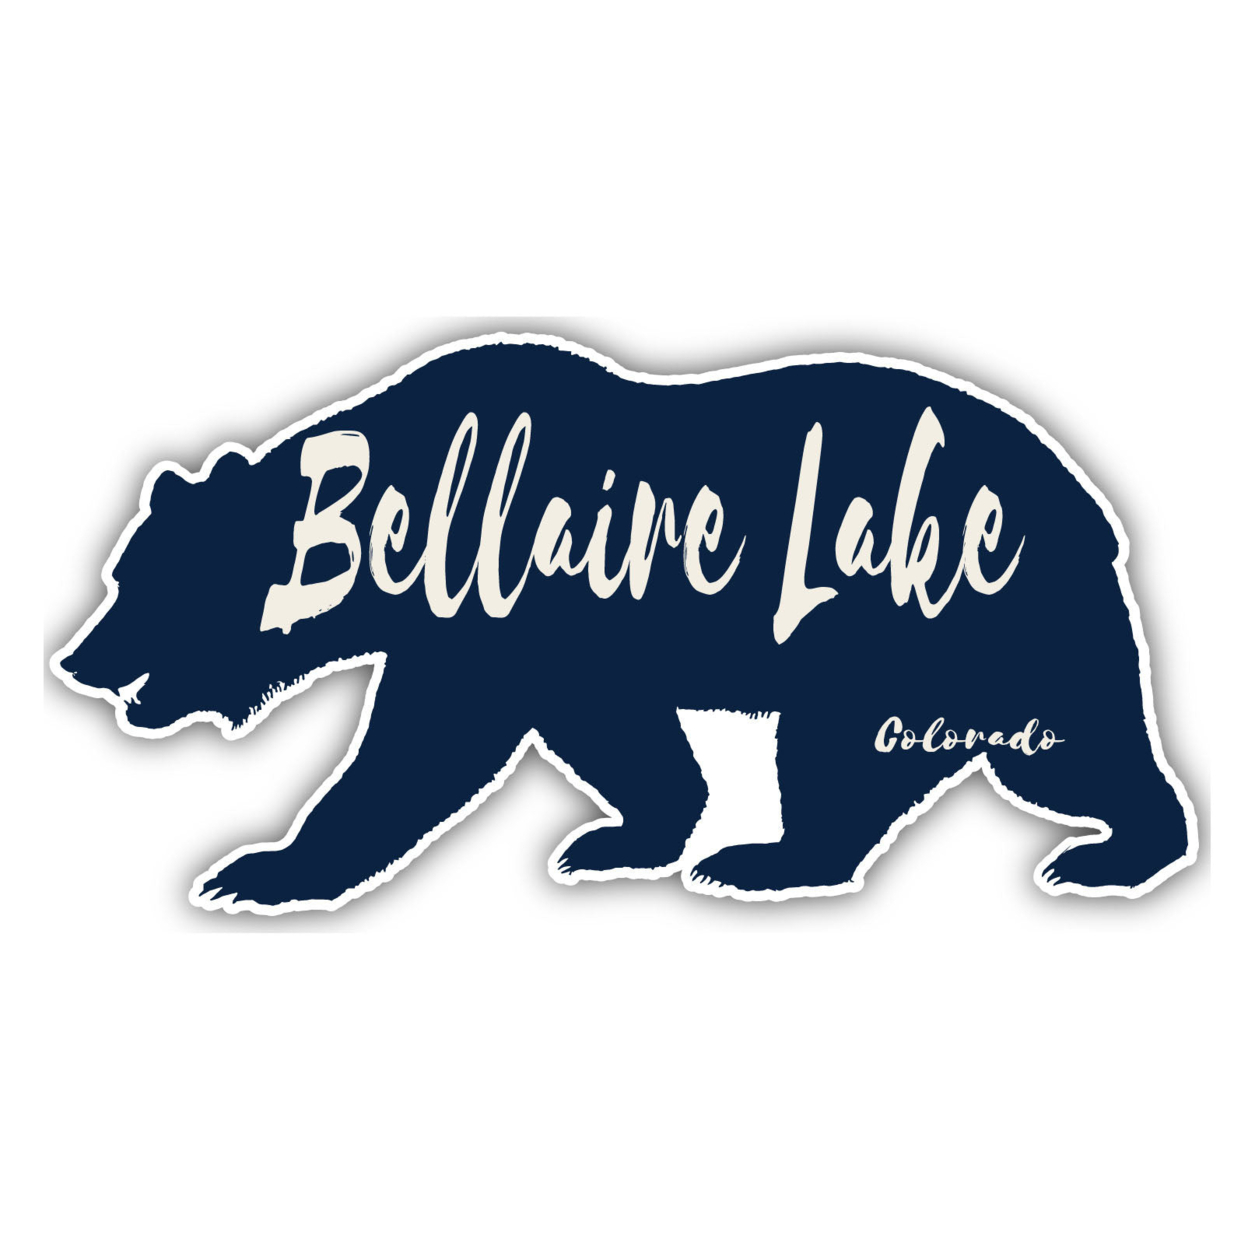 Bellaire Lake Colorado Souvenir Decorative Stickers (Choose Theme And Size) - 4-Pack, 4-Inch, Bear